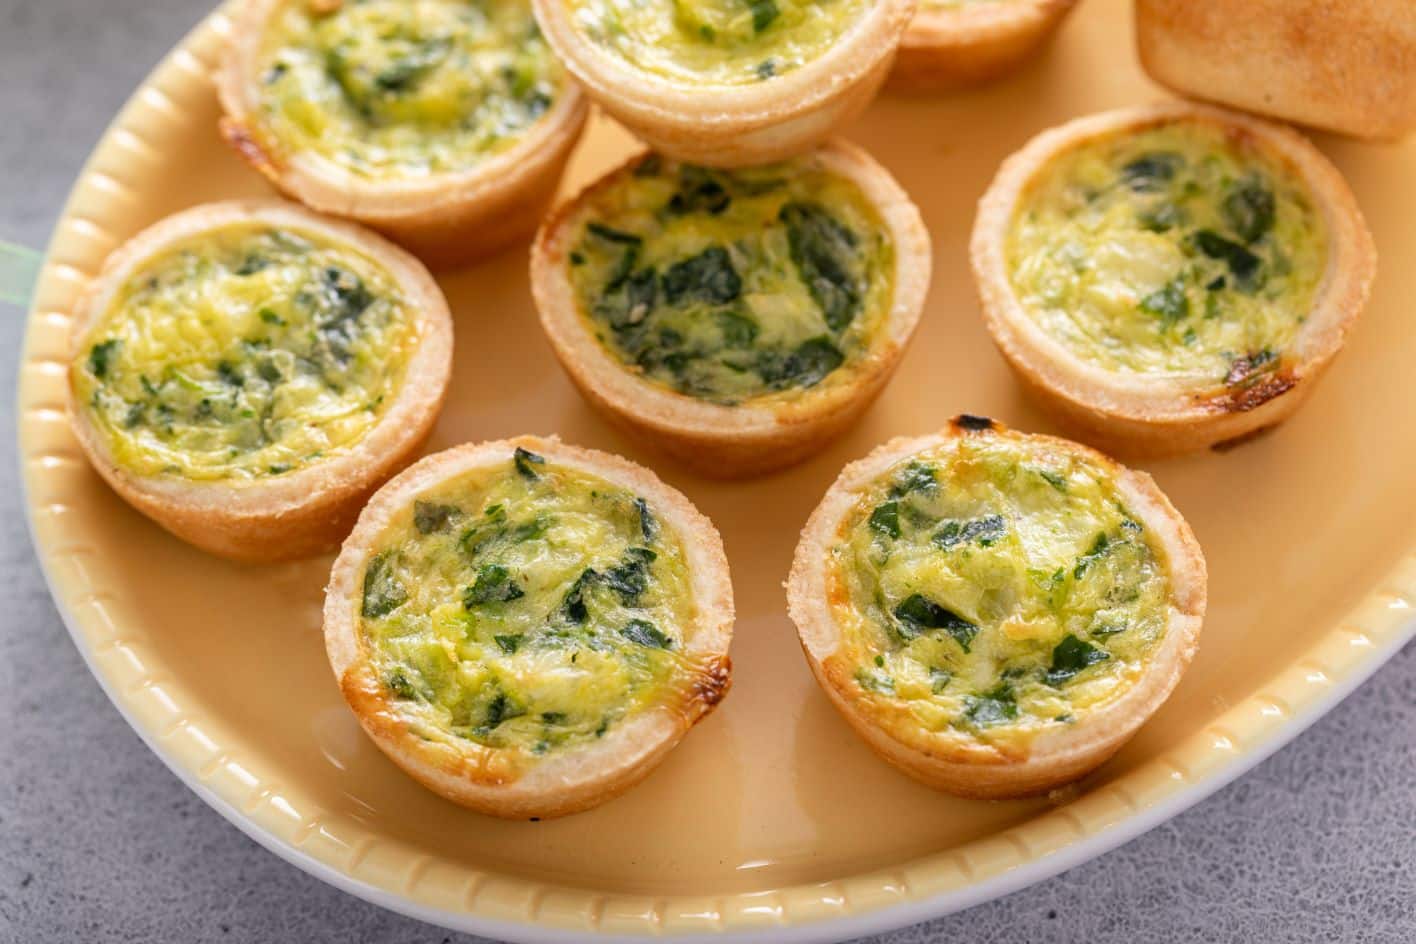 Mini Quiches 5 Healthy French Recipes Under 300 Calories You Should Try | MyFitnesPal